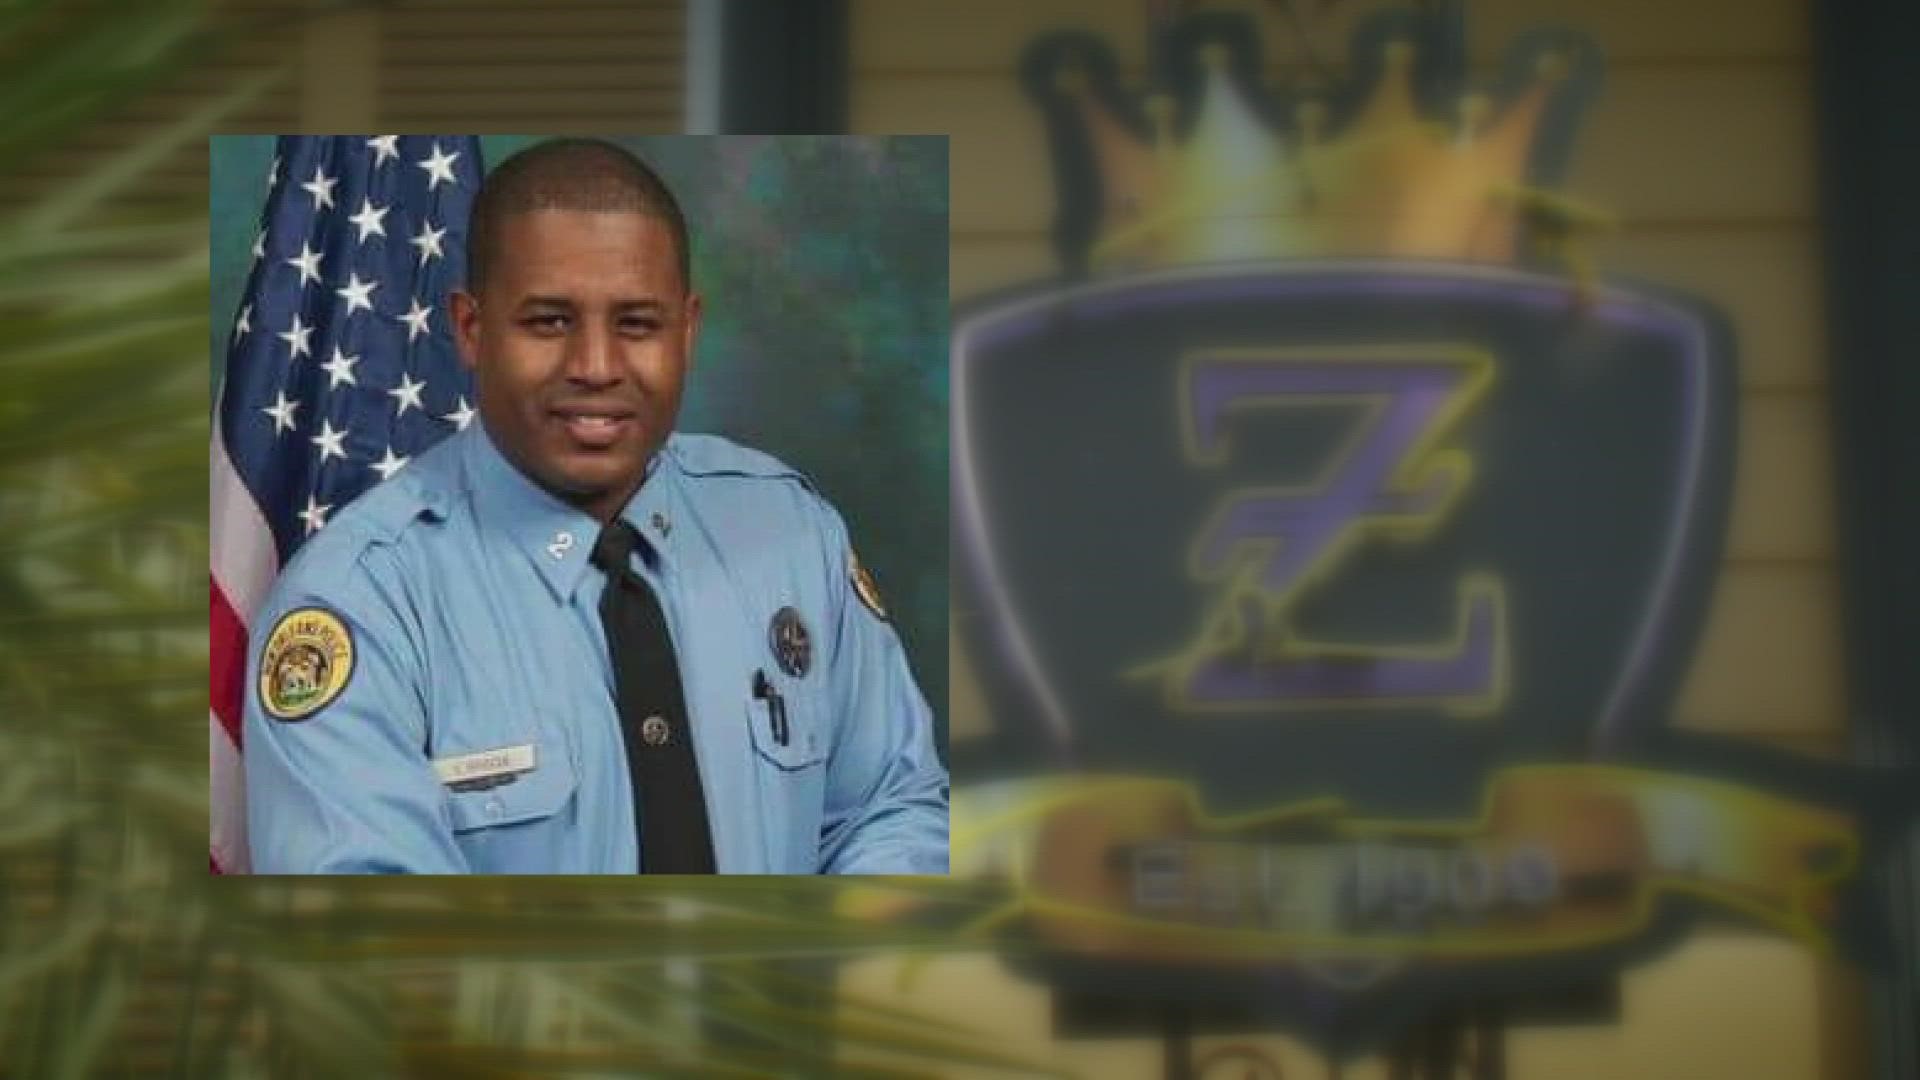 The Zulu Social Aid and Pleasure is paying honor to their fallen member, Detective Everett Briscoe. Briscoe was shot and killed in Houston Saturday.